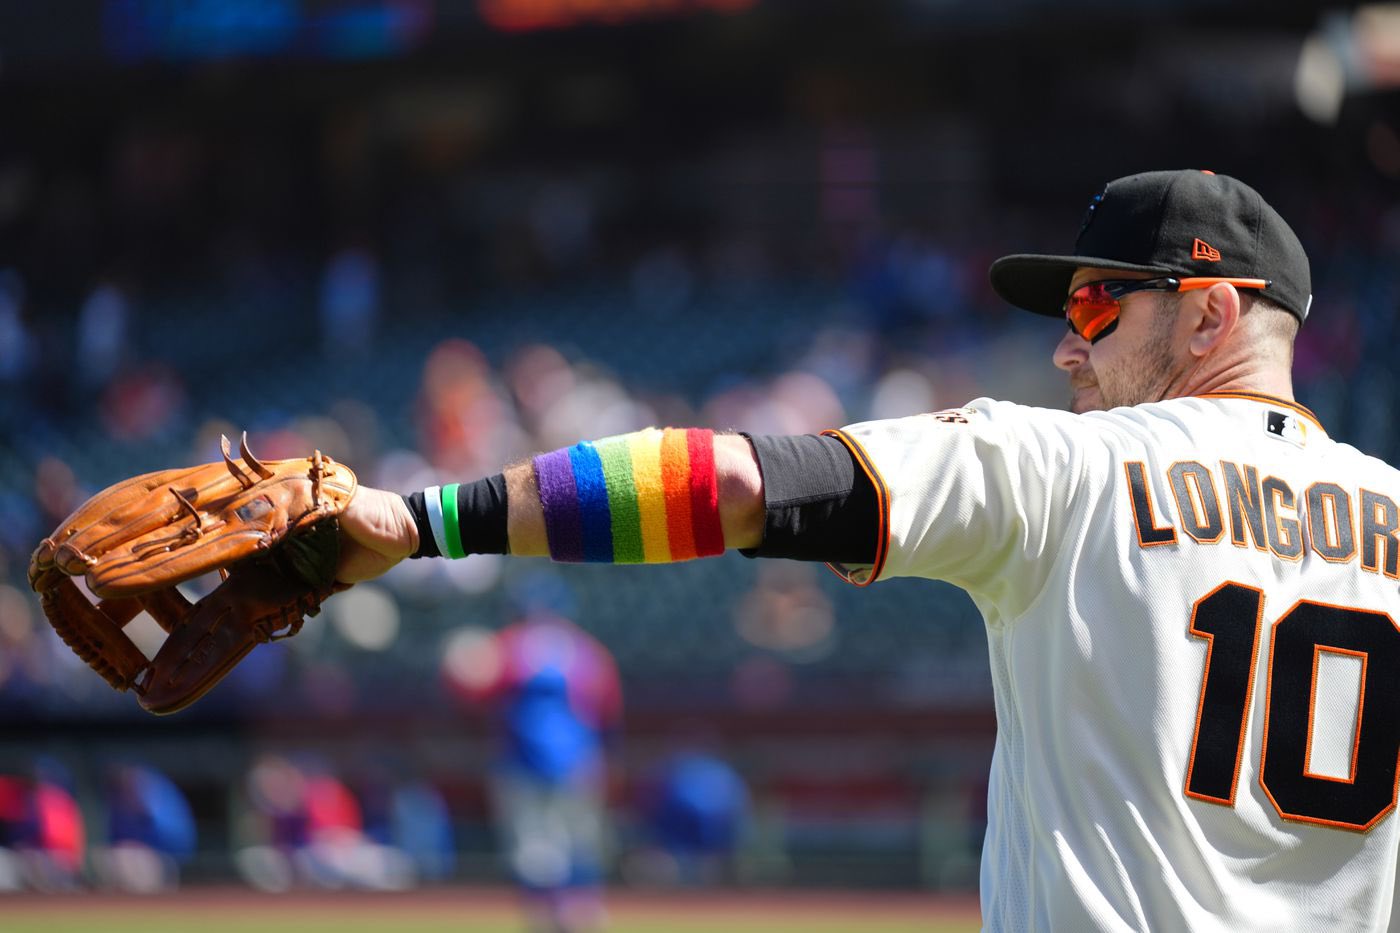 Giants become first MLB team with Pride uniforms